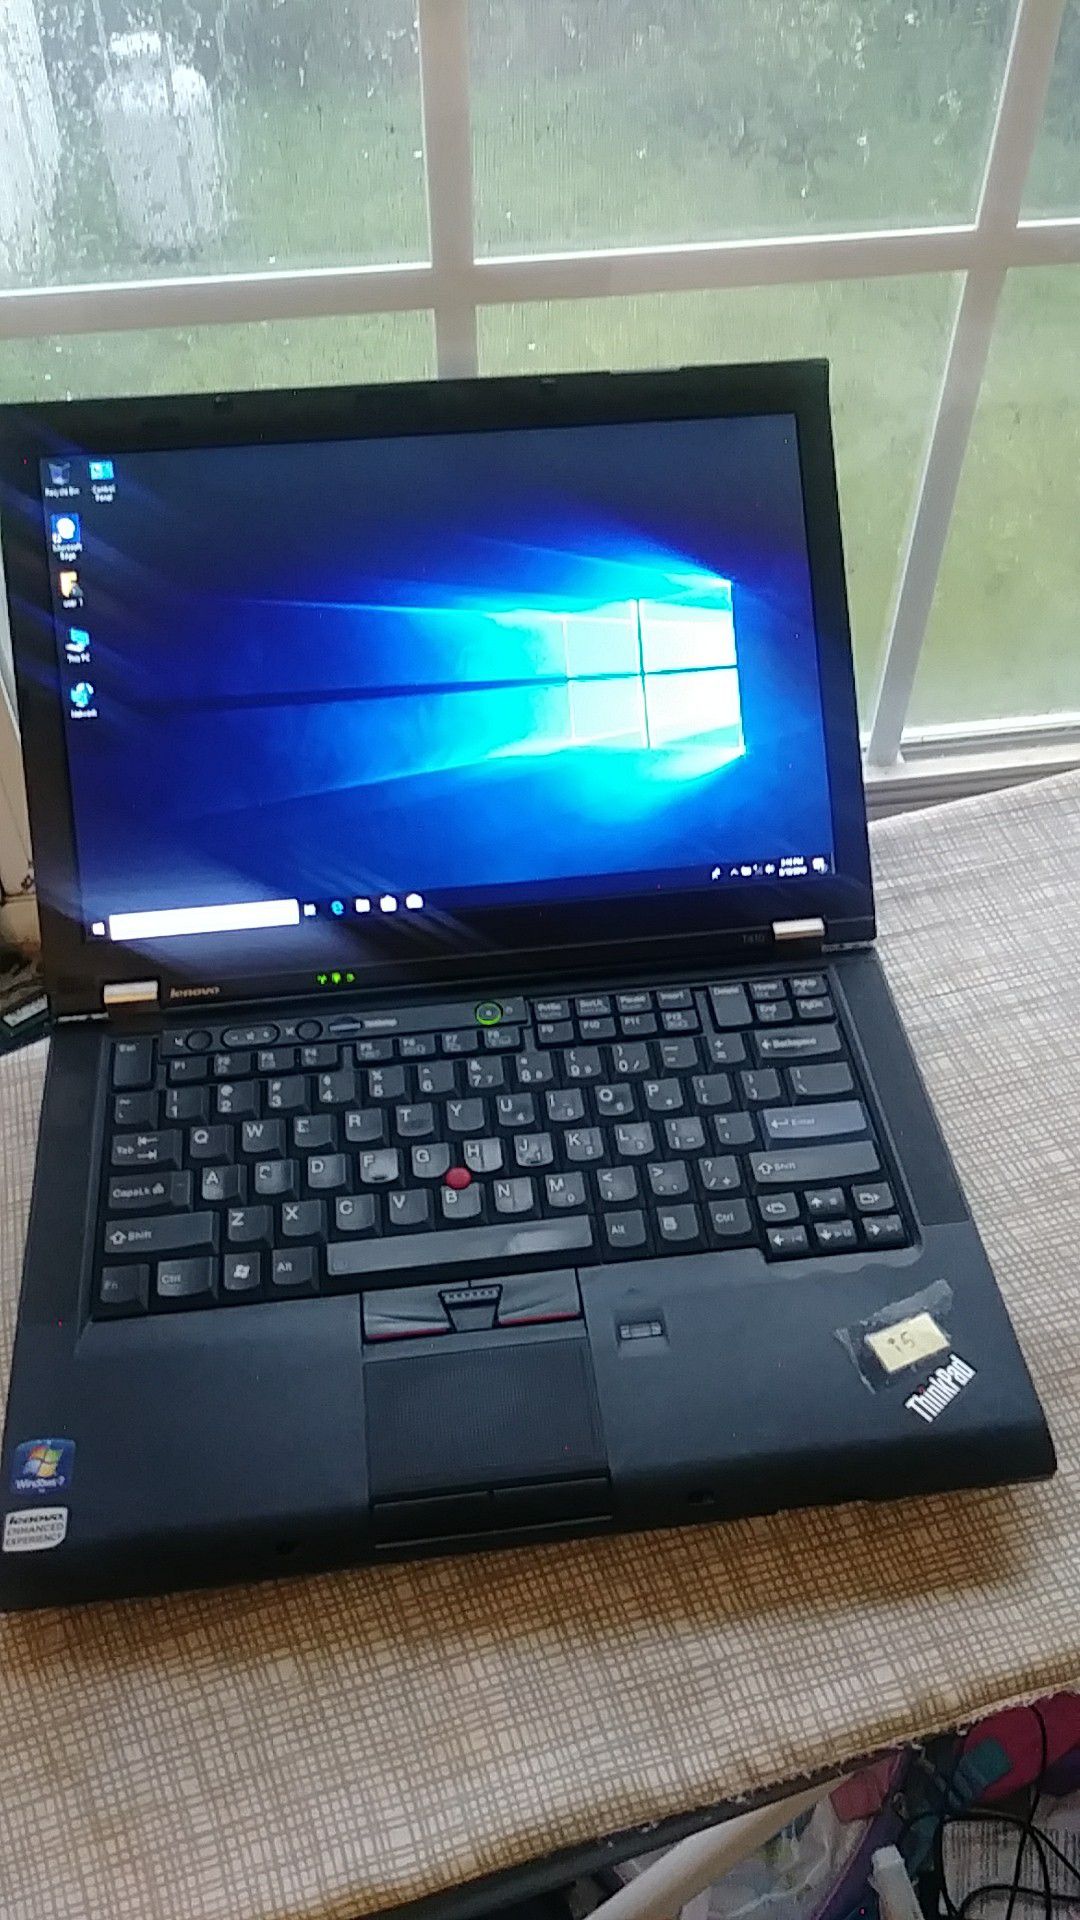 Frustration Frivillig fornuft LENOVO THINKPAD T410. core i5, 320gb hdd, 4gig ram, webcam, 2.53GHz,  win.10-mf. for Sale in Raleigh, NC - OfferUp